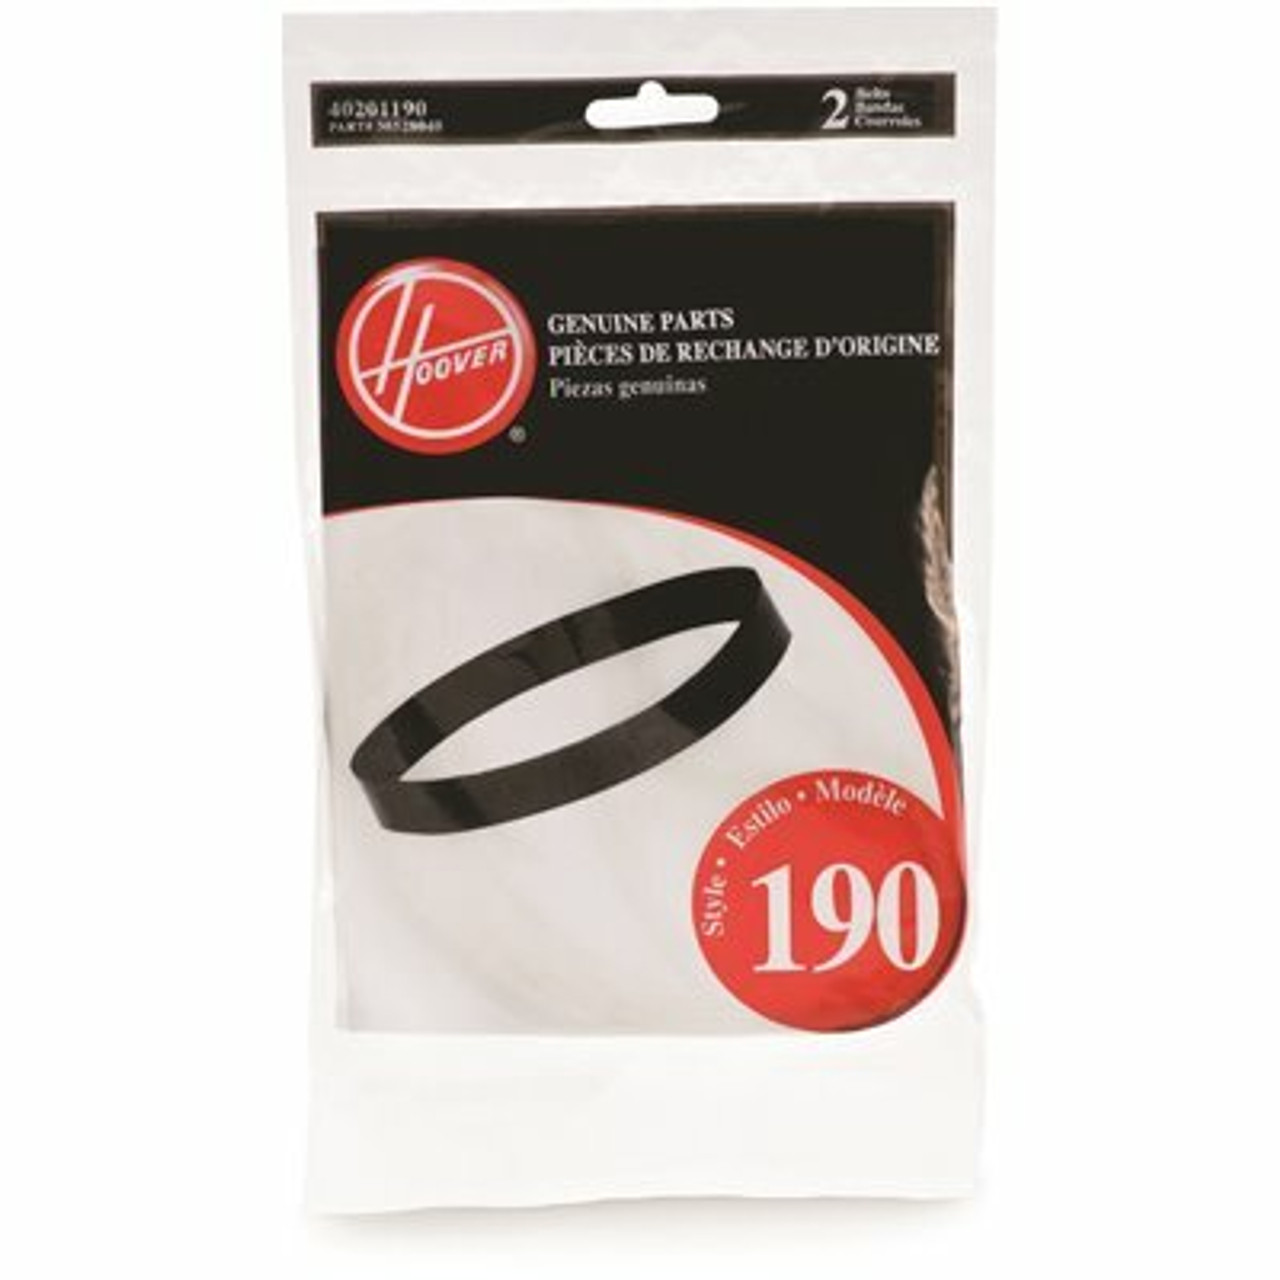 Hoover Type 190 Agitator-Belts For Upright Vacuum Cleaners (2-Pack)